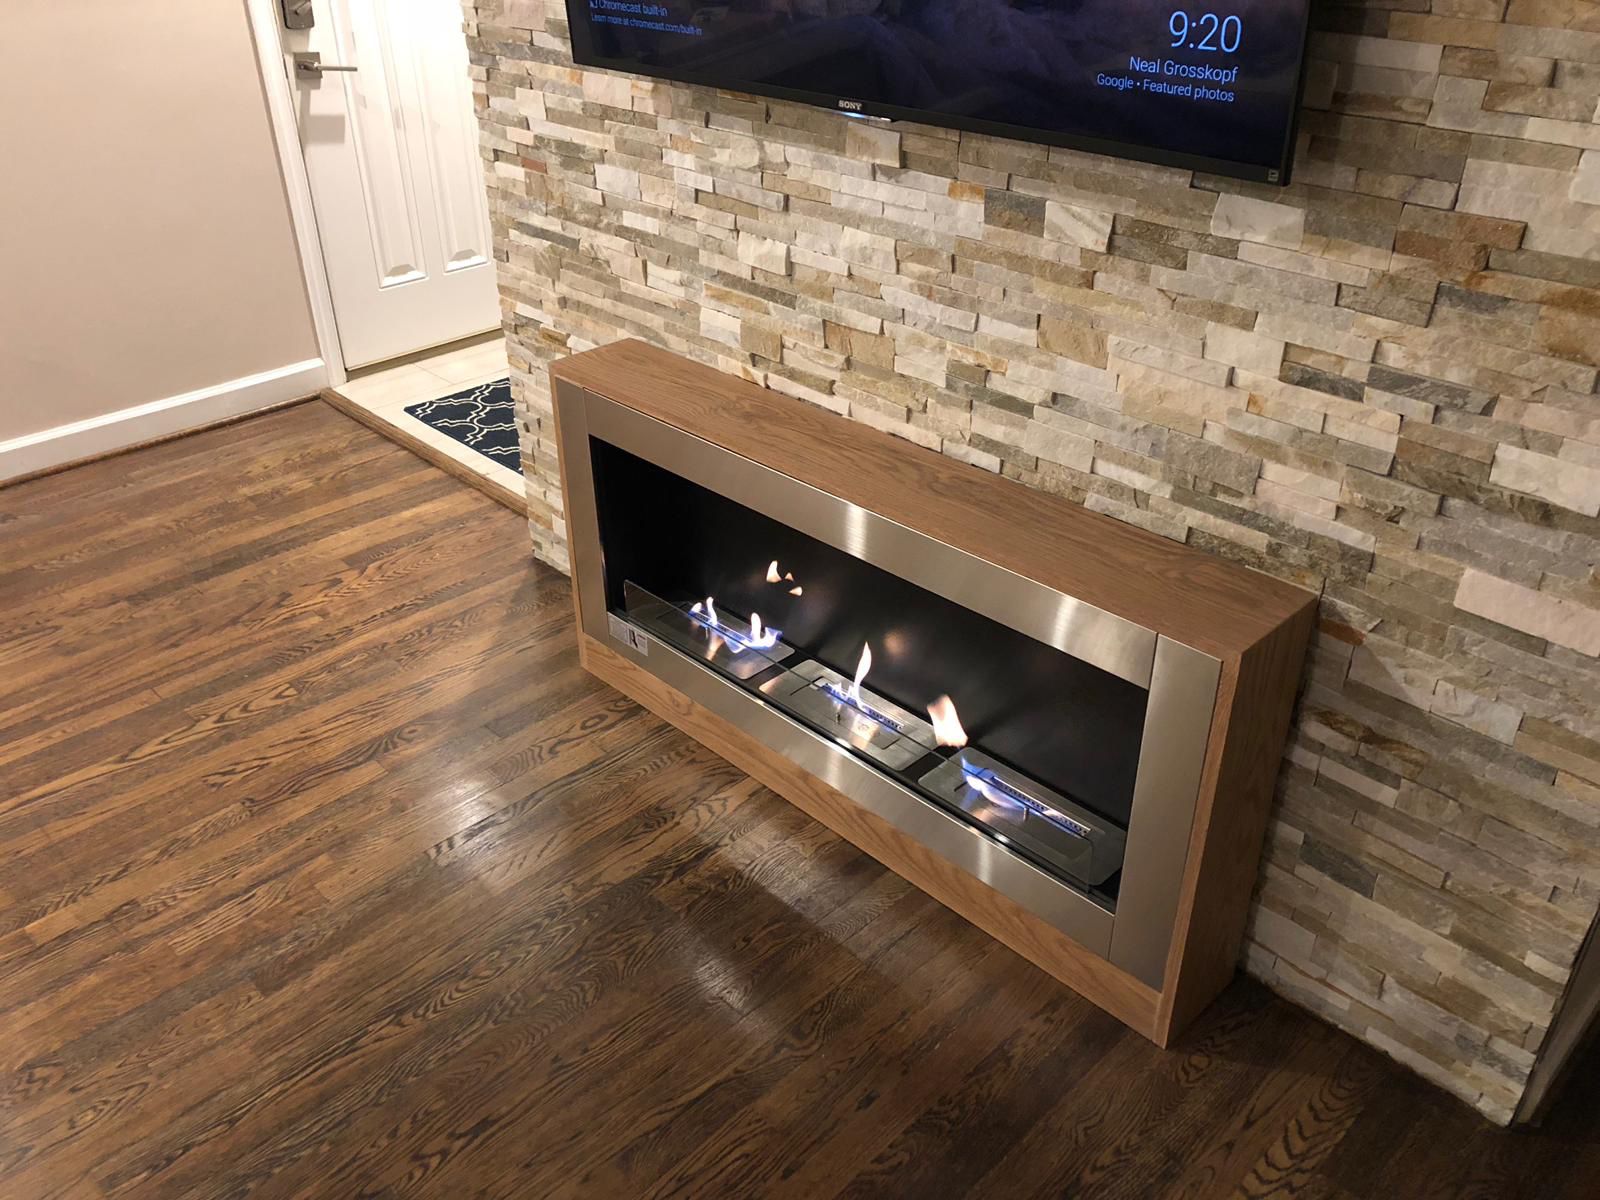 Xbeauty 27" Ventless Built in Recessed Bio Ethanol Fireplace with Safety Glass,Indoor Wall Mounted Fireplace